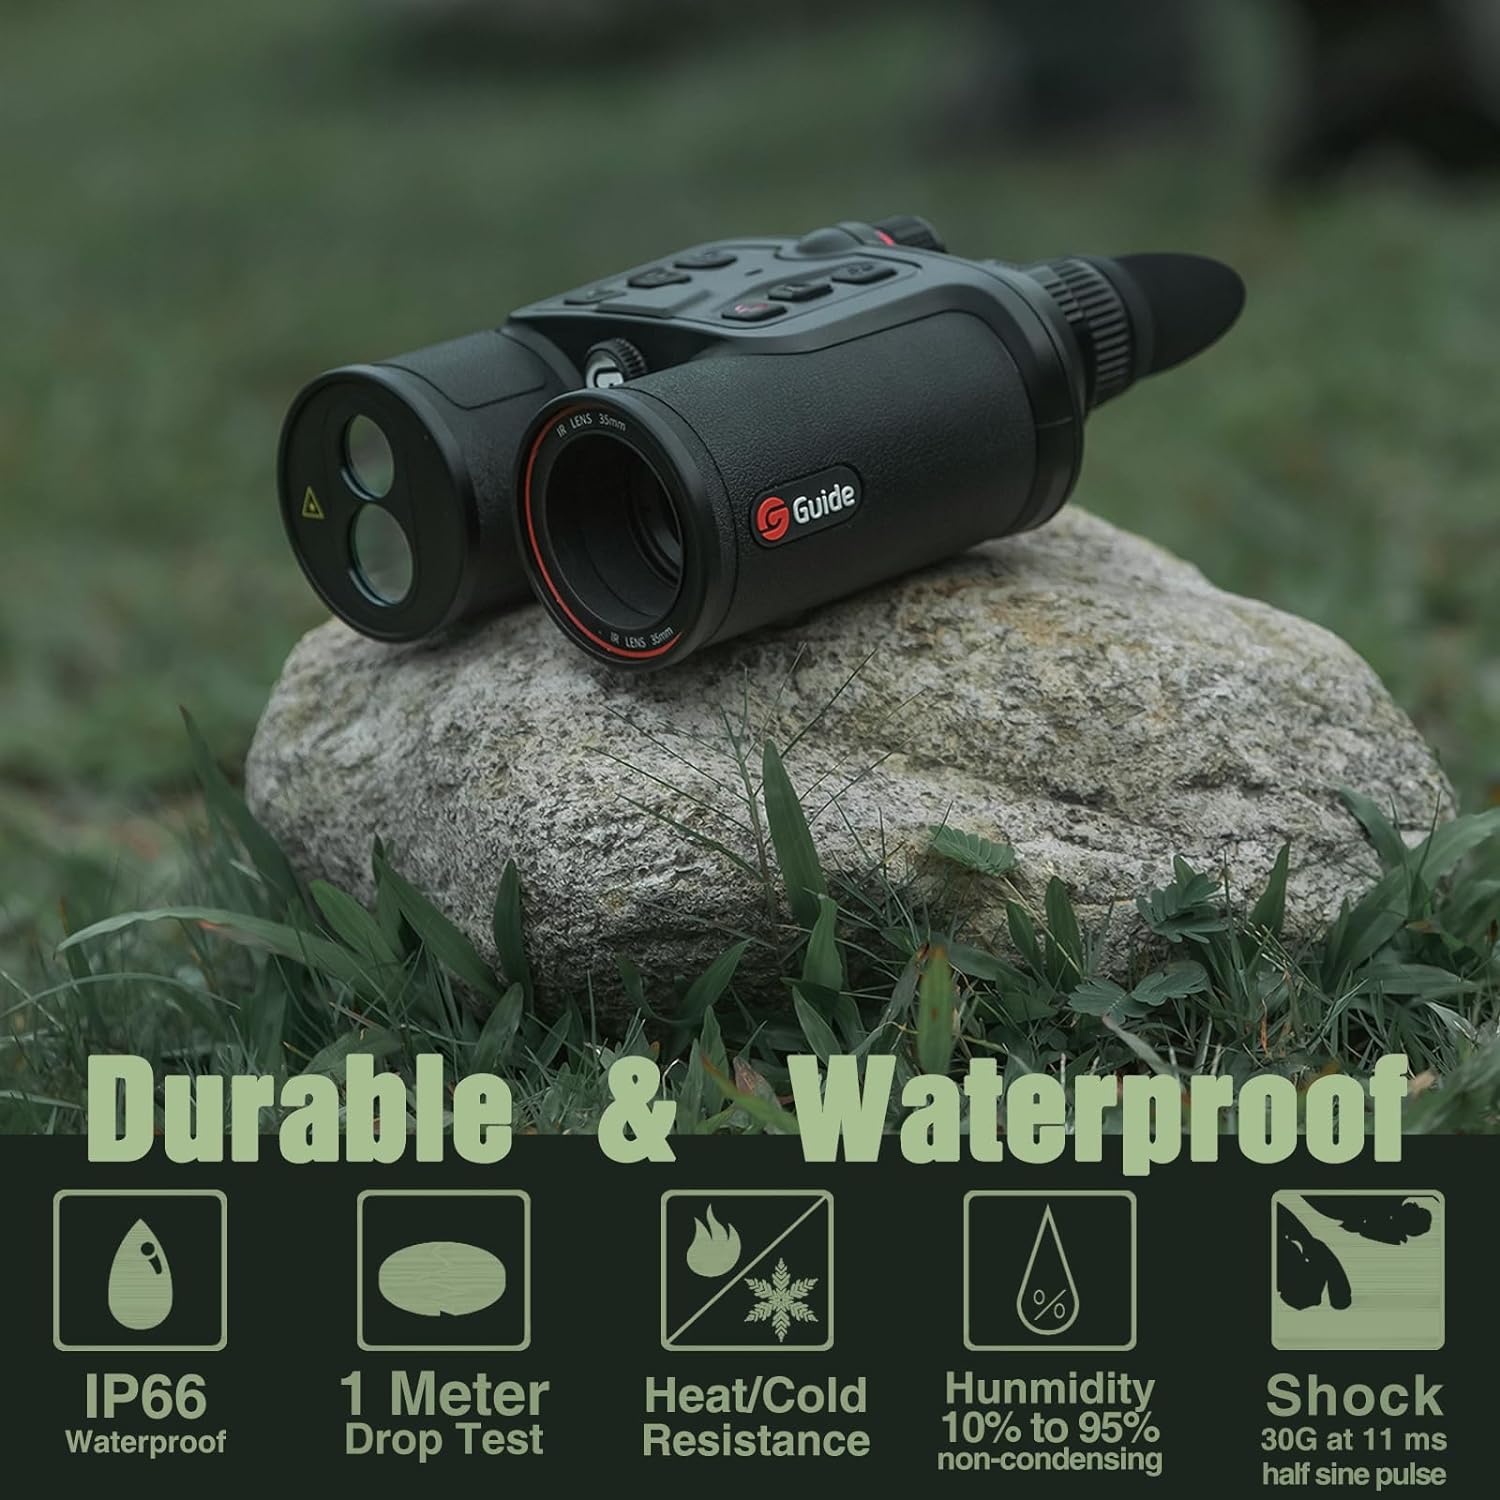 GuideSensmart TN630 Thermal LRF Binoculars for Hunting， Infrared Heat Night Vision with 35mm Focal Length, 640×480 pix @  30 mK NETD Sensor, LRF with 600m Accuracy, OLED High-Definition Display